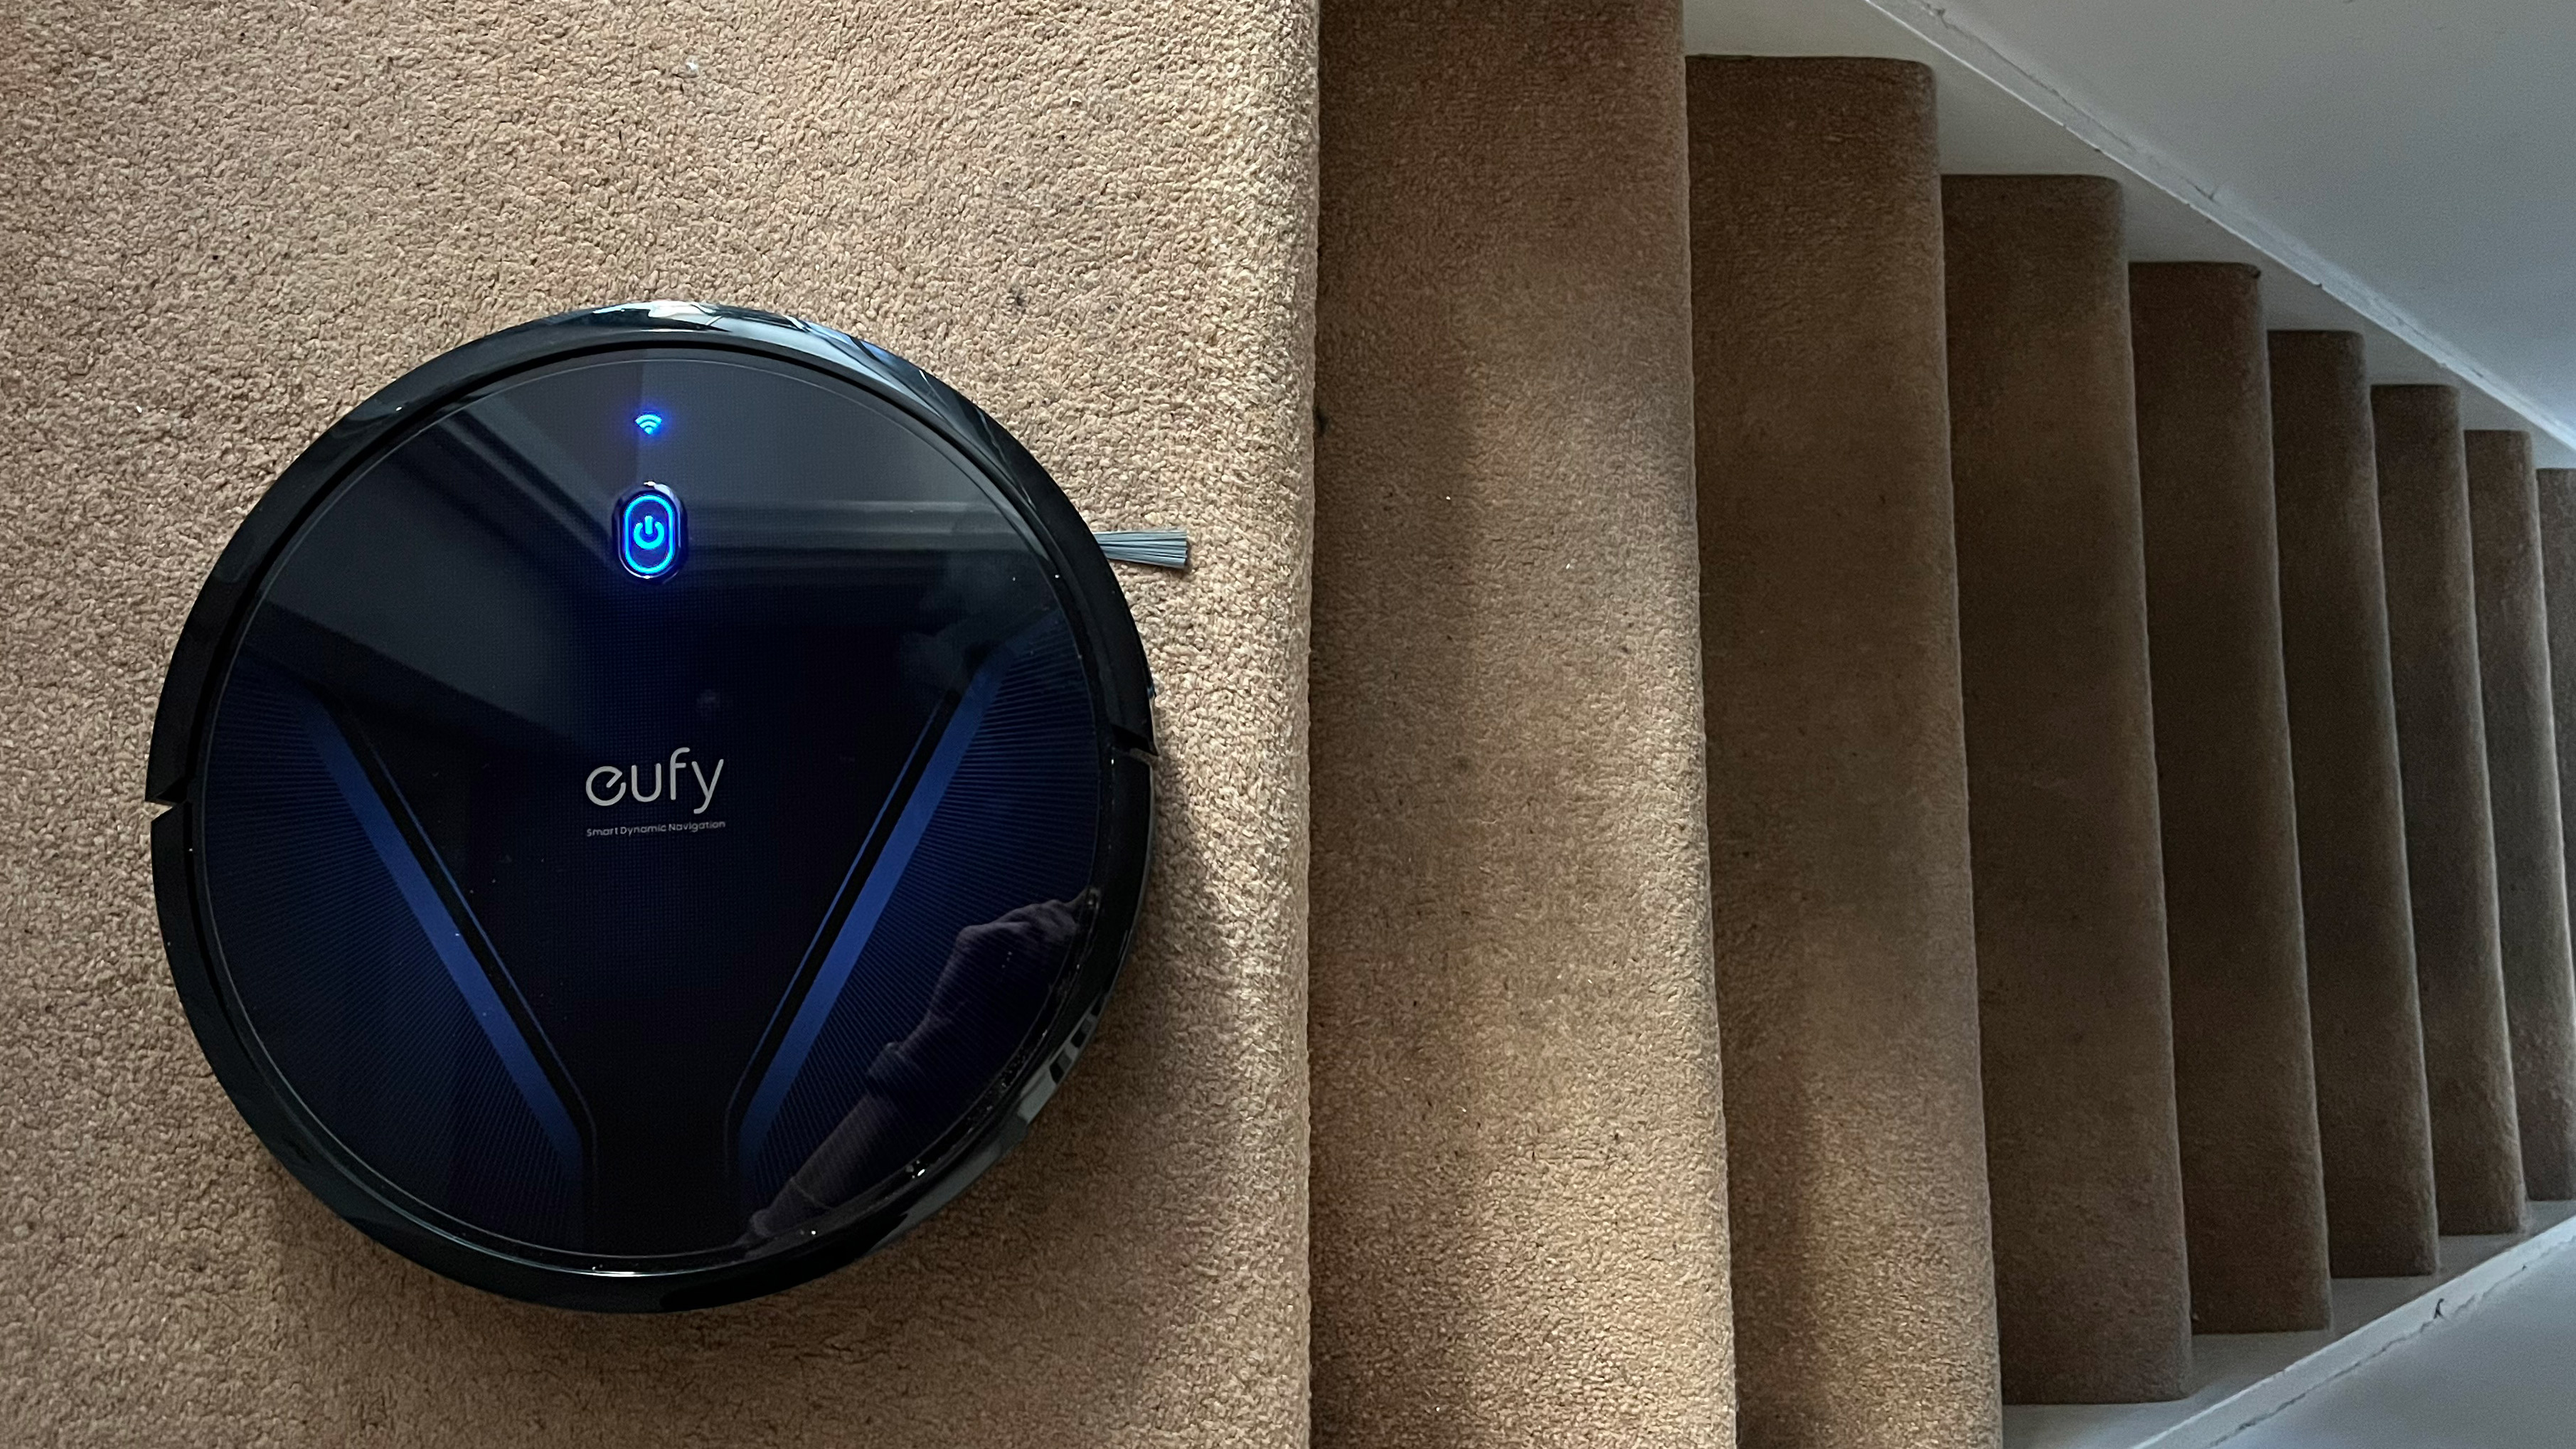 The Eufy RoboVac G20 cleaning carpet next to a set of stairs